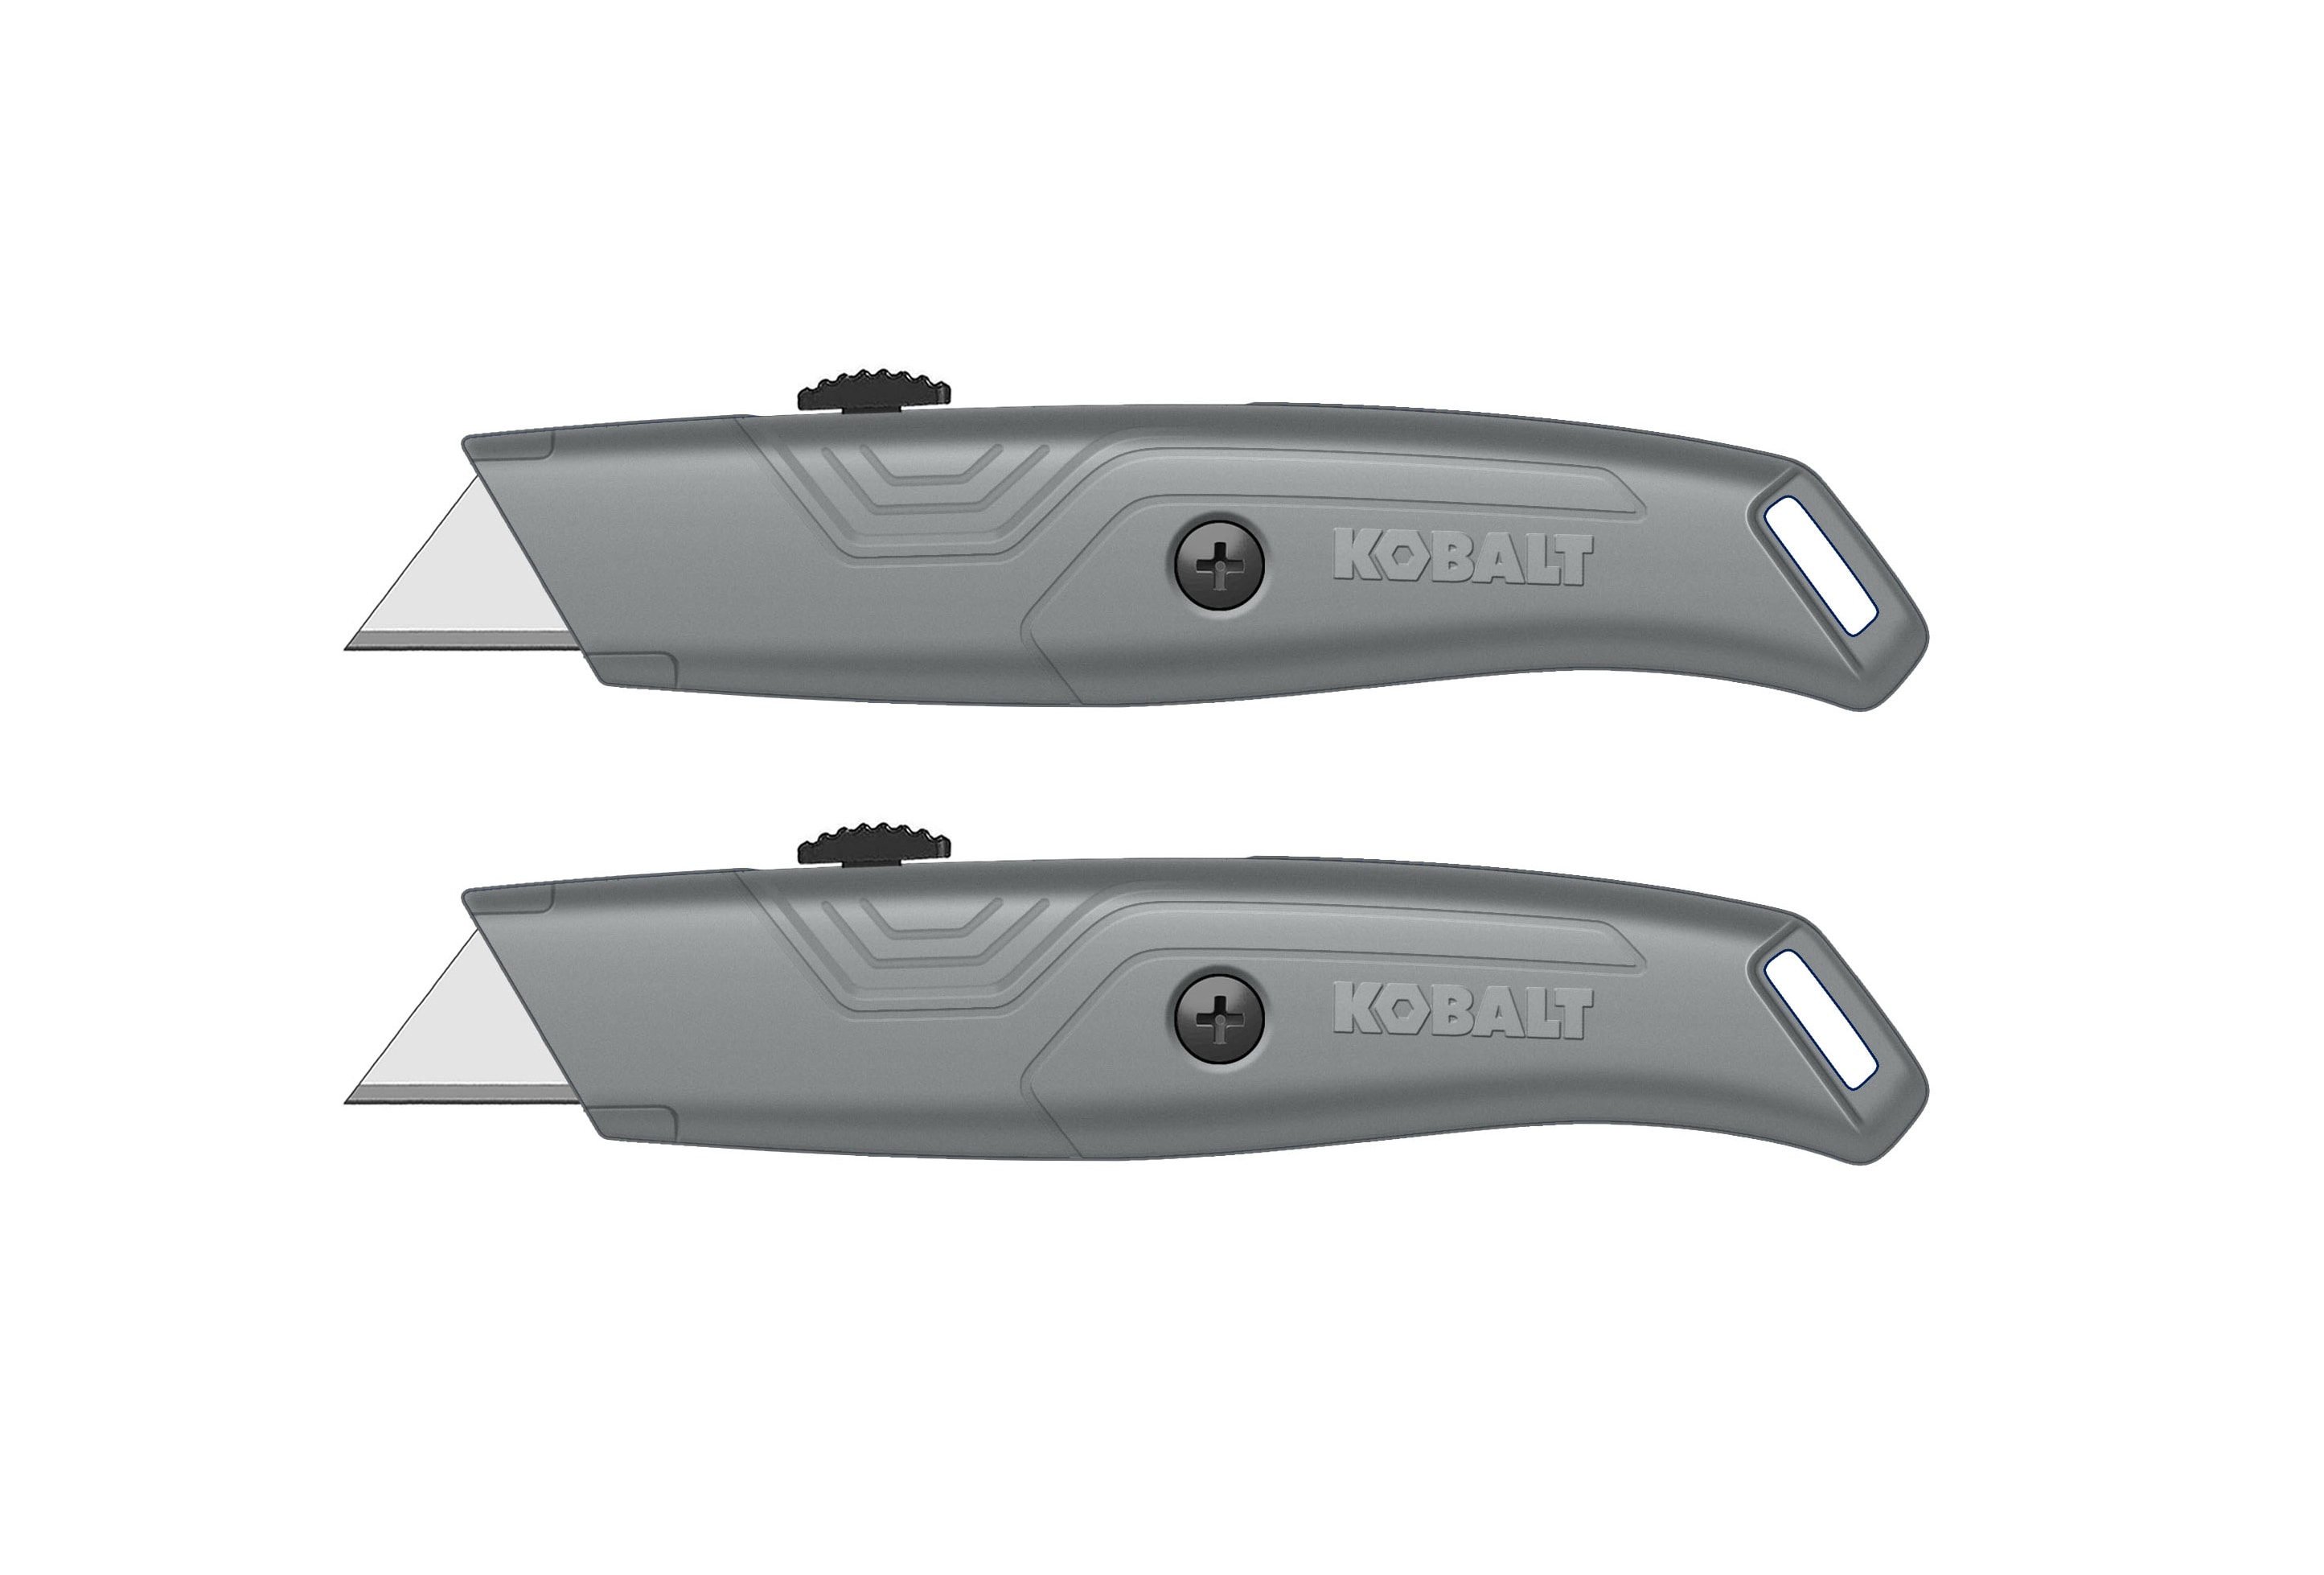 TIFICAL 3-Pack Box Cutter, 18mm Wide Blade Utility Knife